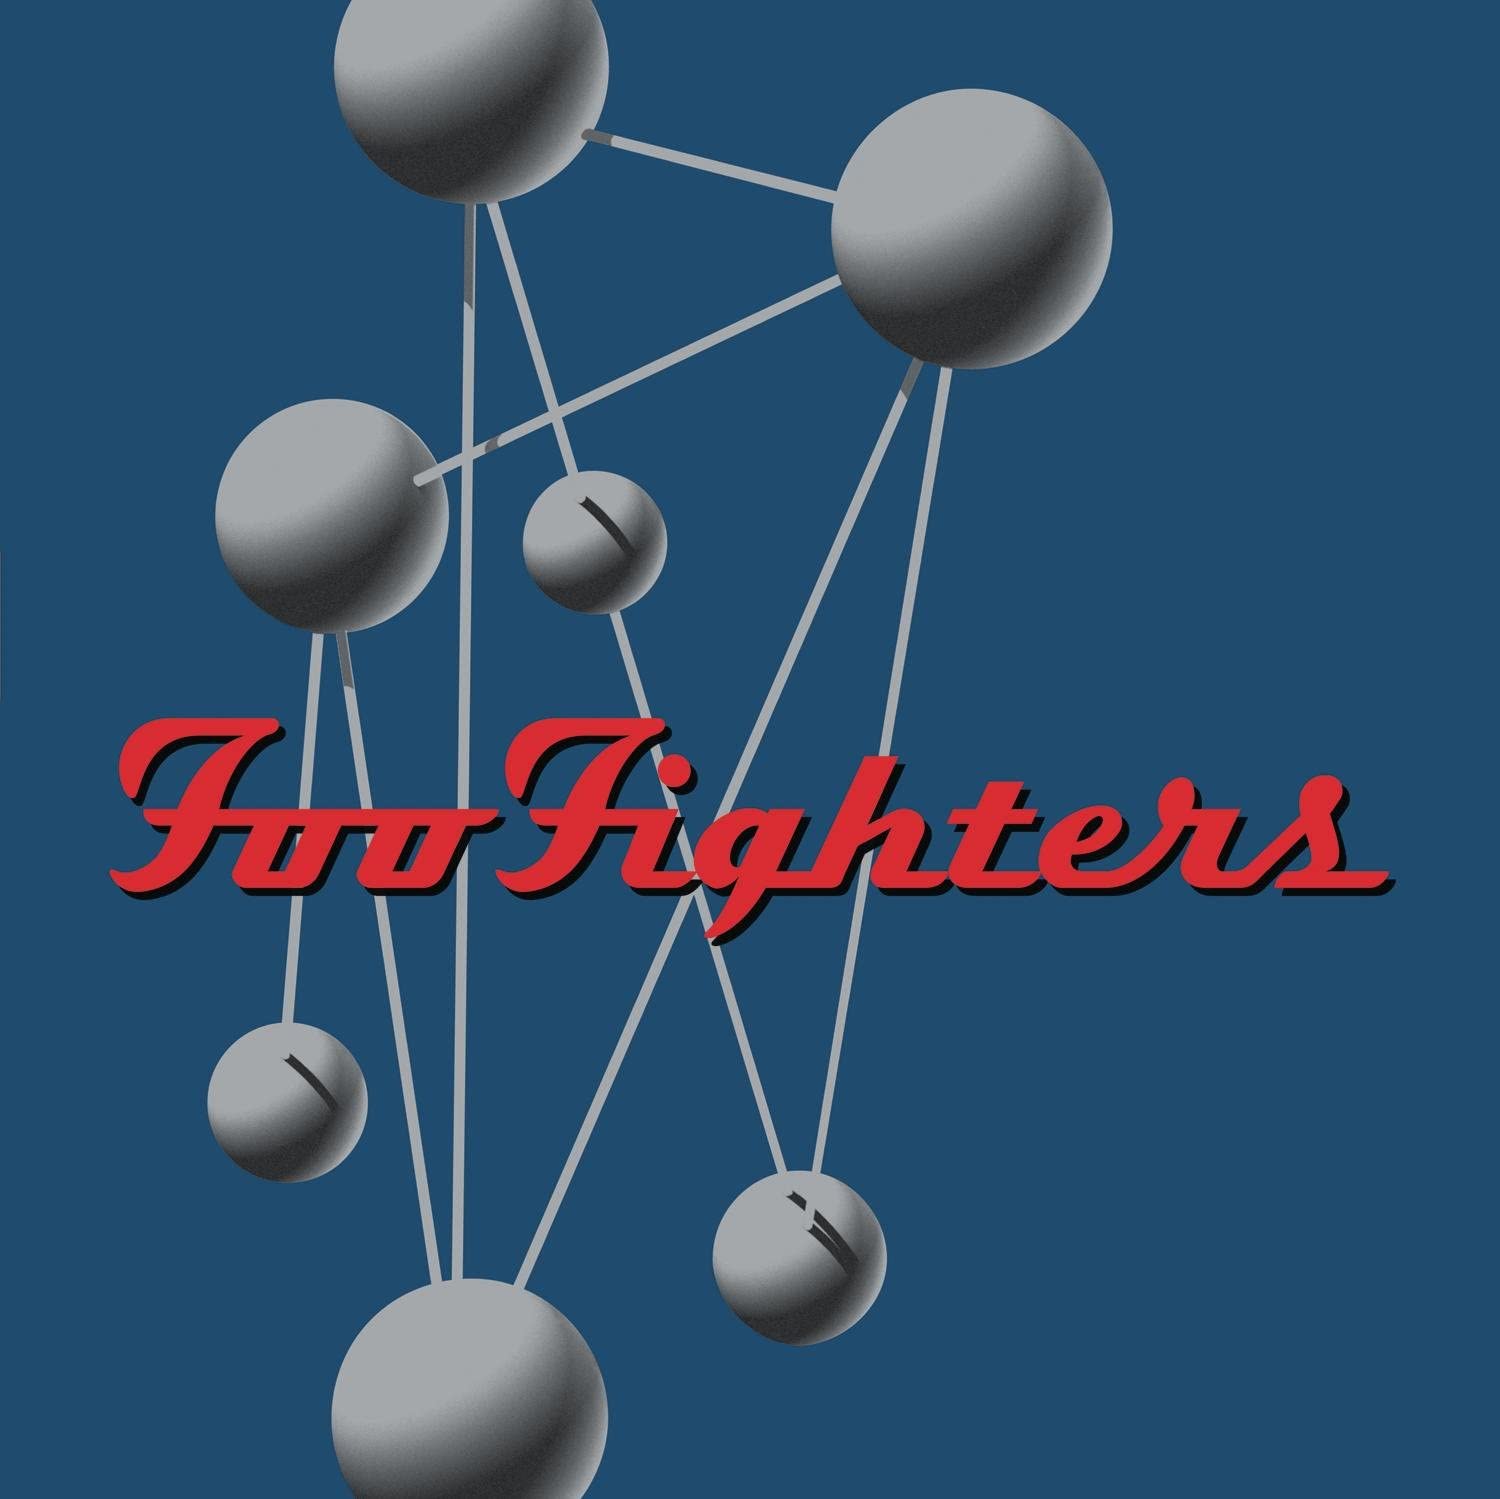 The second studio album on Vinyl by Foo Fighters. Originally released in May 1997, it marked the official debut of Foo Fighters as a band, as their 1995 debut album 'Foo Fighters' was primarily recorded by frontman Dave Grohl. Features the singles 'Monkey Wrench', 'Everlong' and 'My Hero